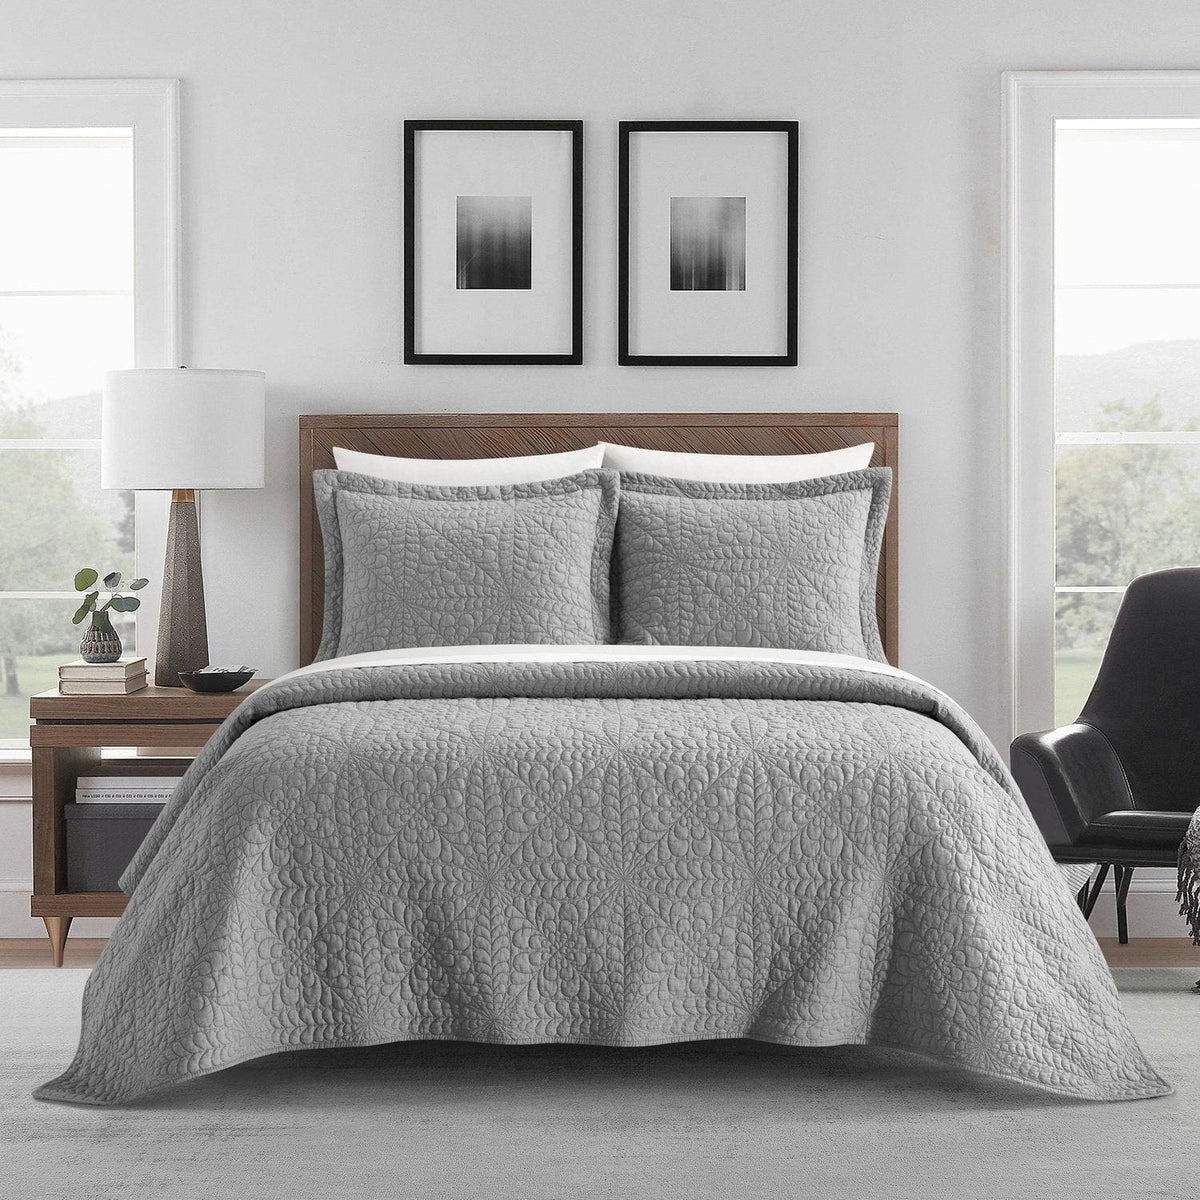 NY&C Home Babe 3 Piece Cotton Quilt Set Grey